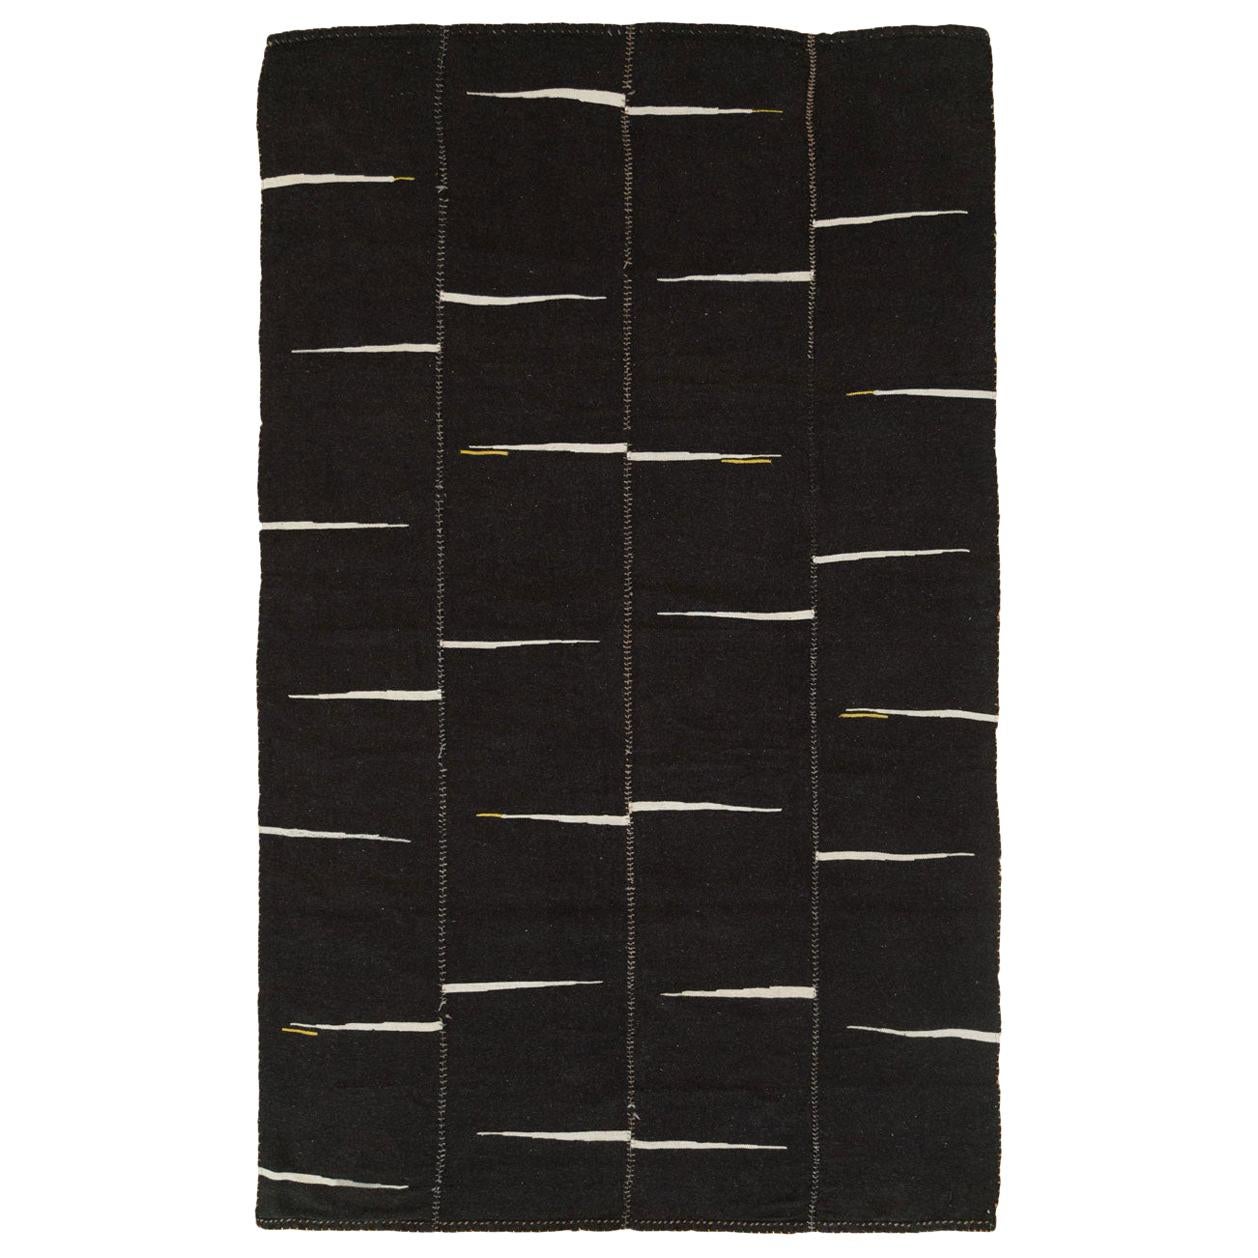 Contemporary 21st Century Persian Flat-Weave Kilim Room Size Accent Rug in Black